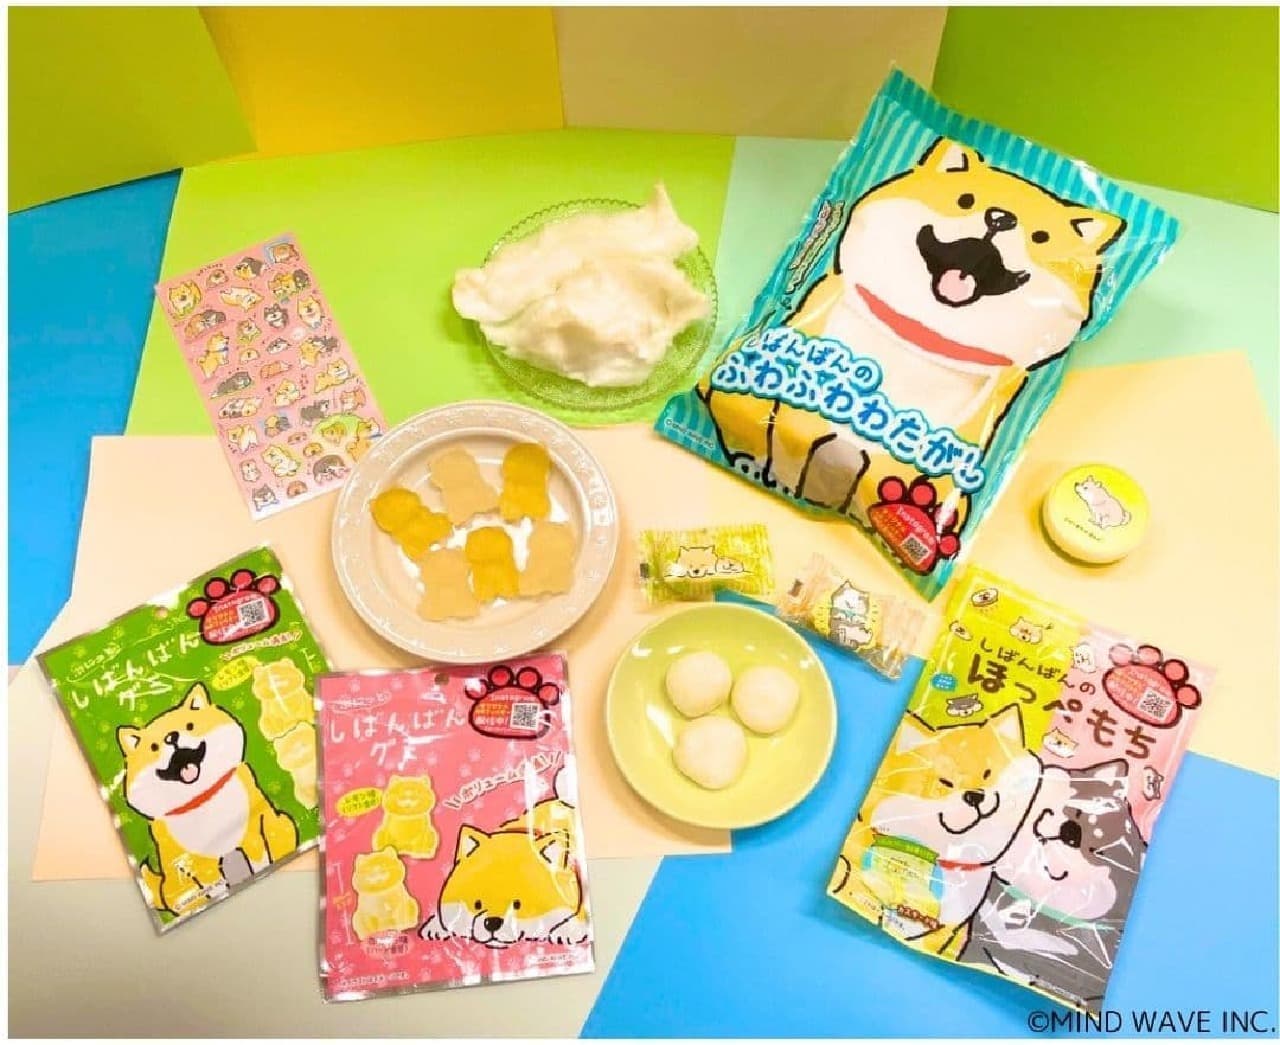 3 kinds of snacks including gummies collaborated with Shibanban